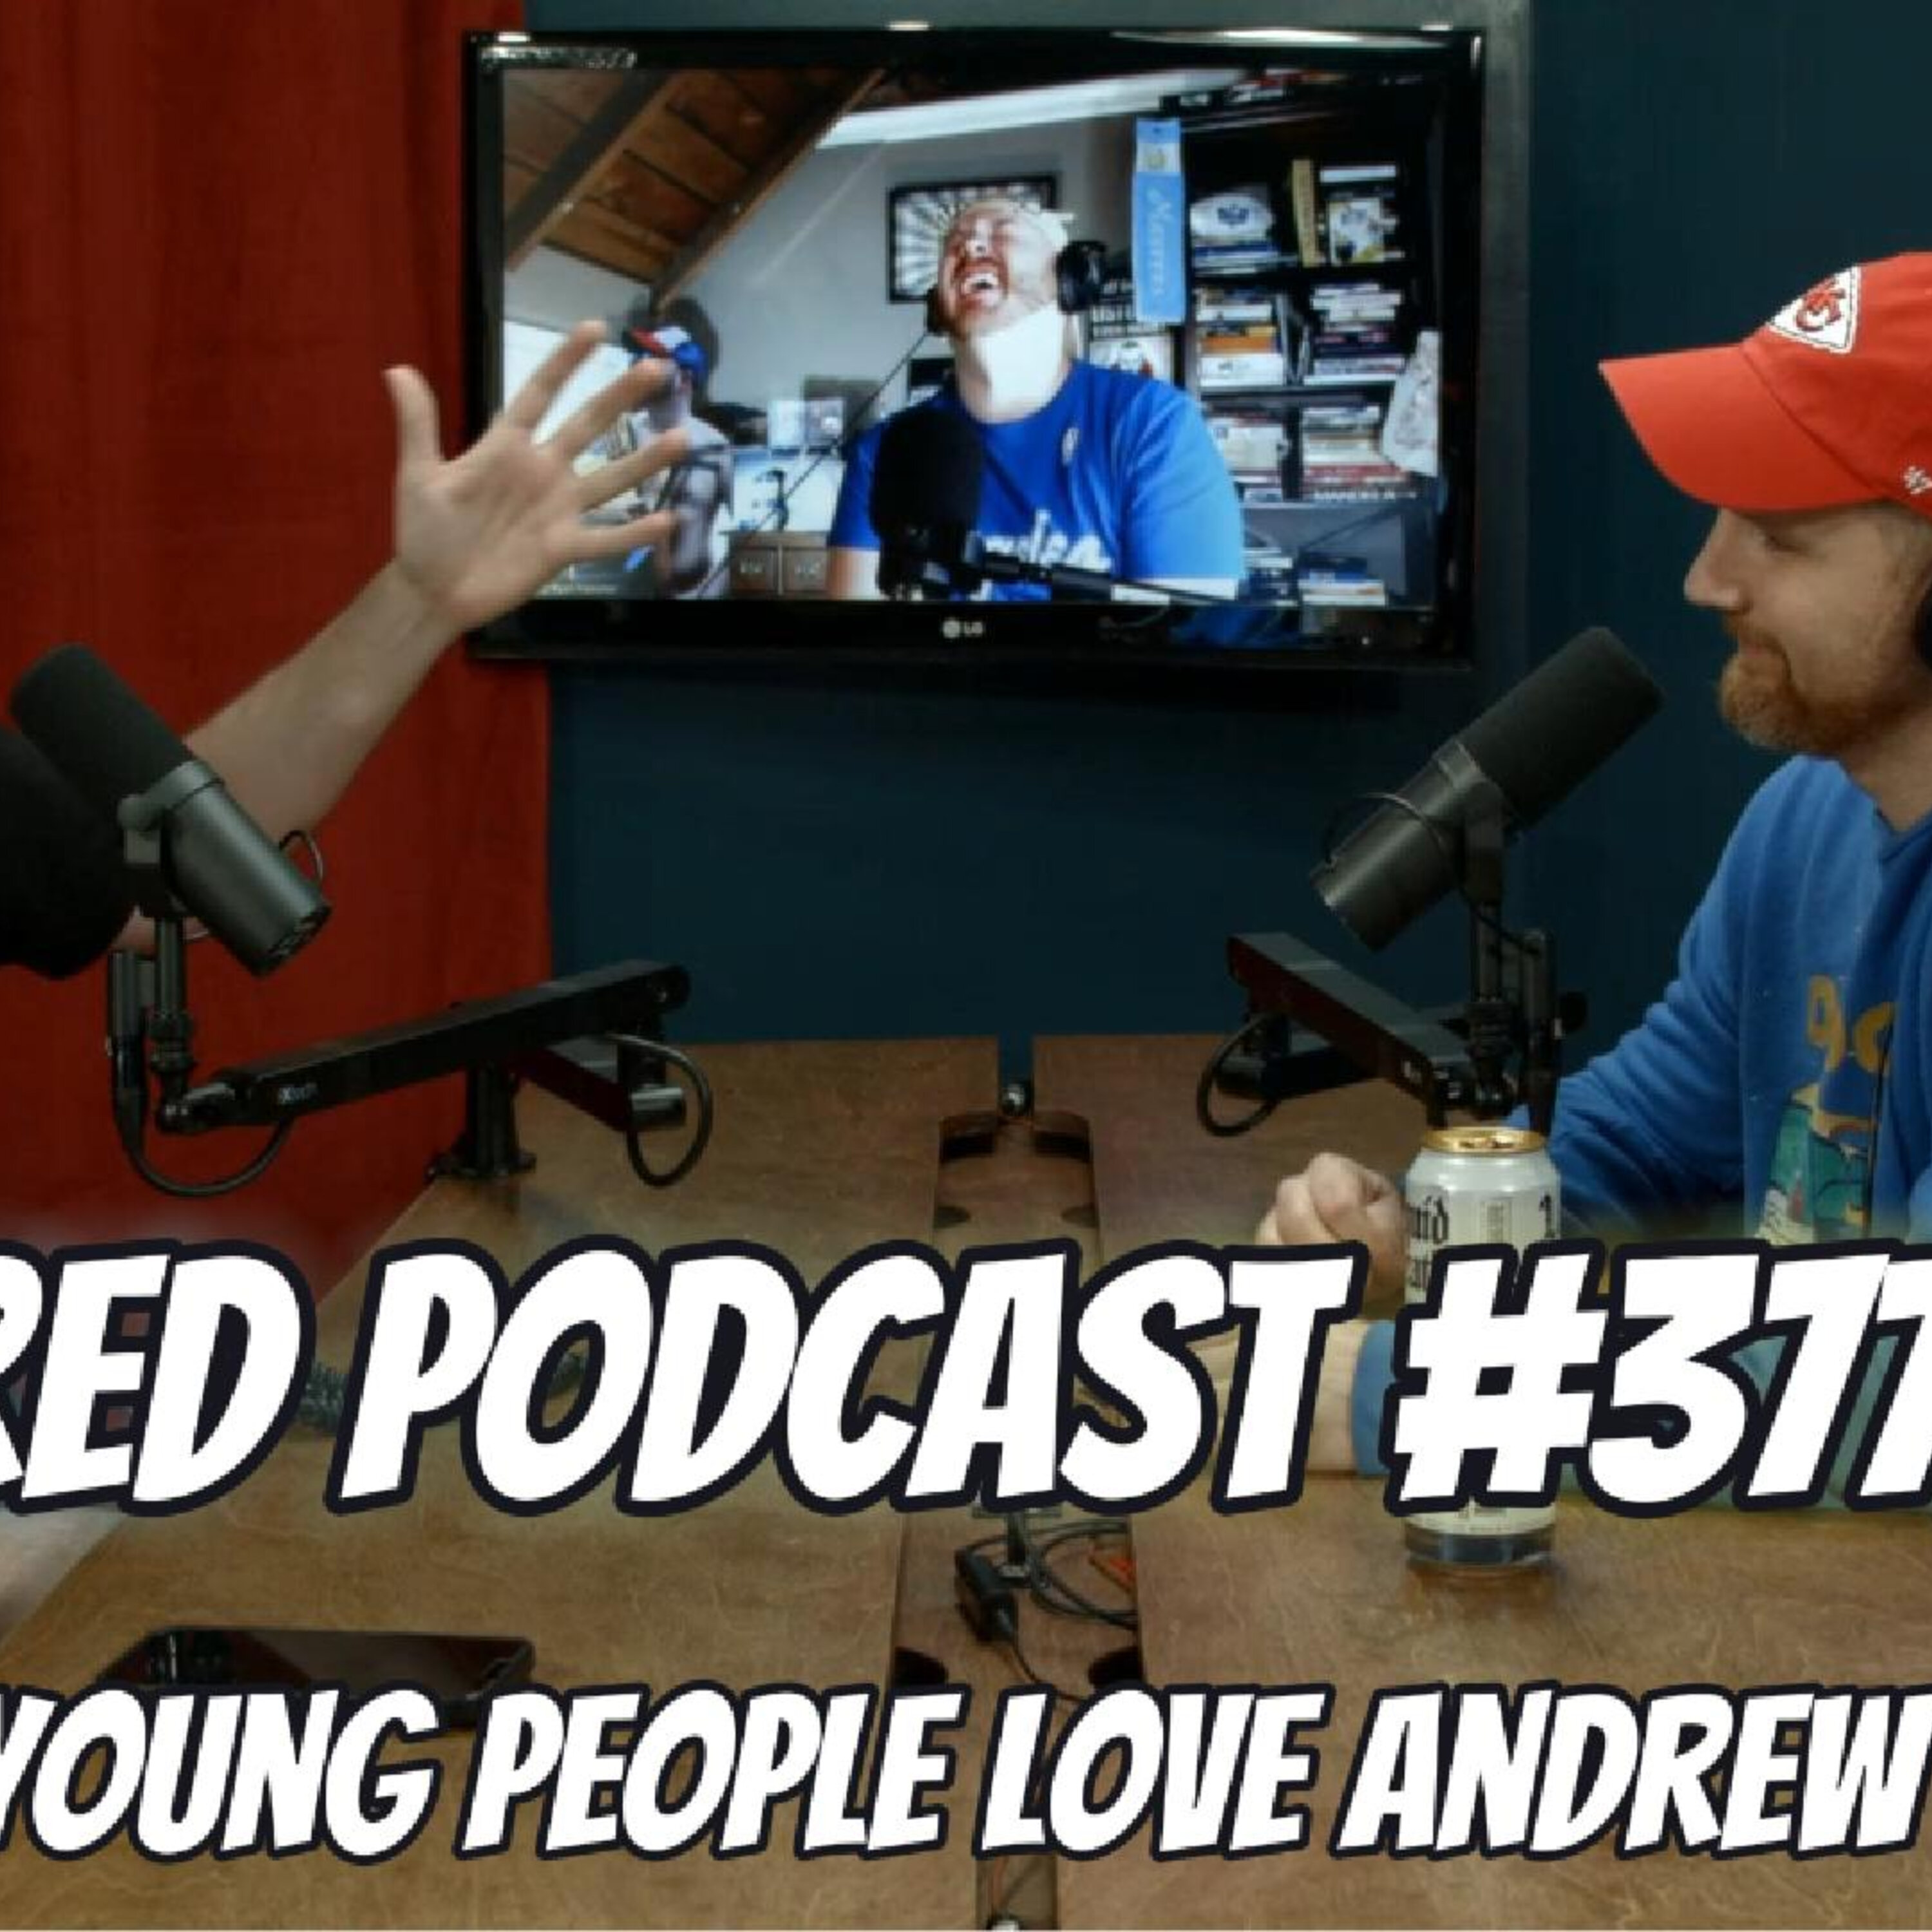 #377 - Why Do Young People Love Andrew Tate?